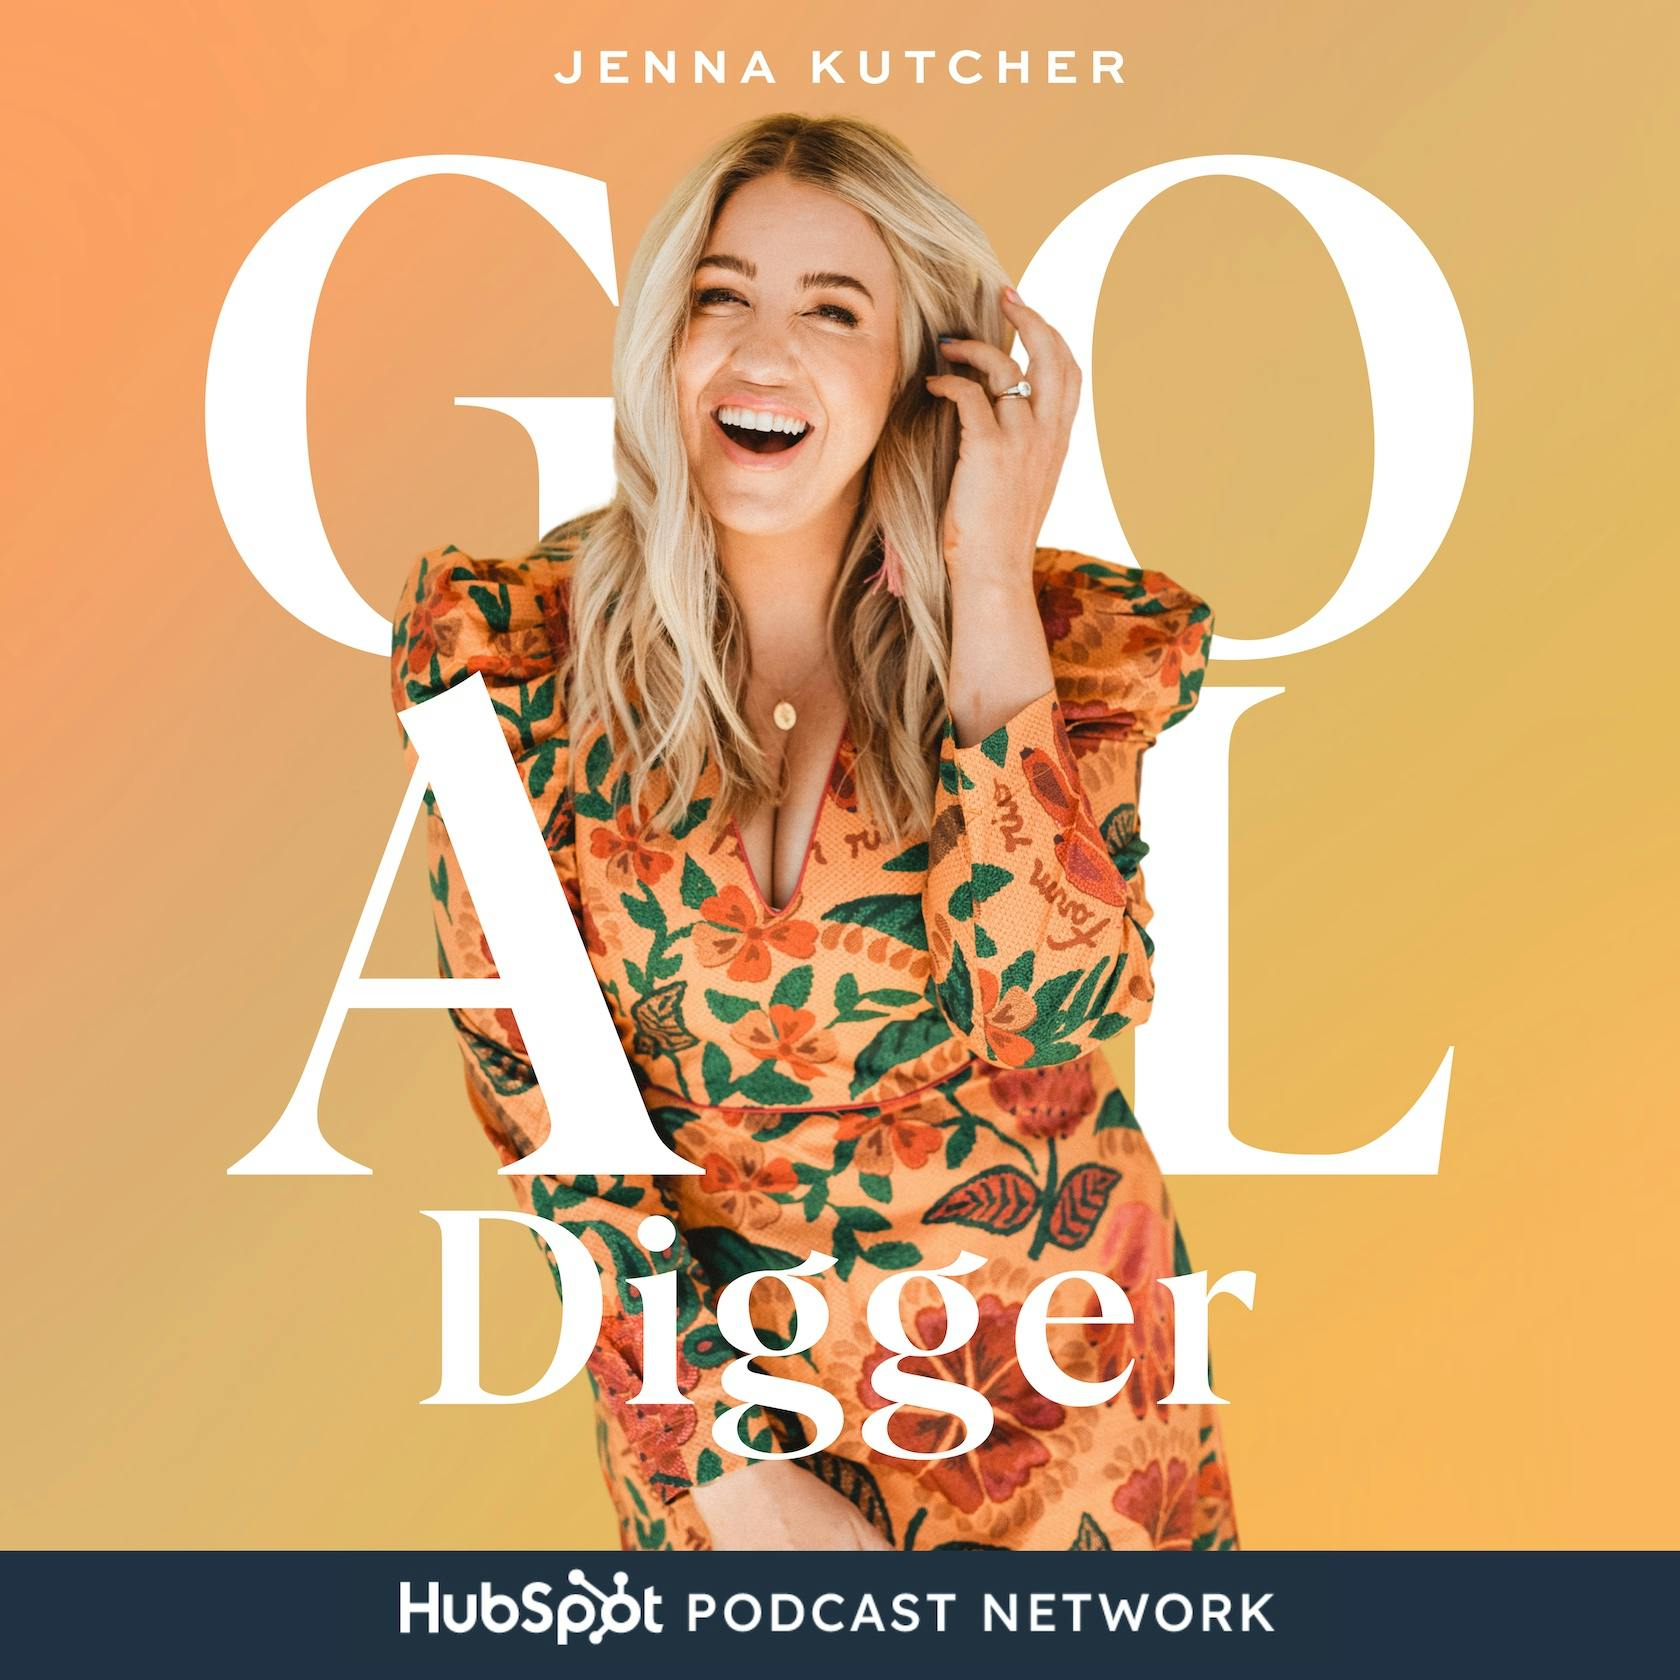 609: Ways to Get Unstuck and Discover Your New Direction